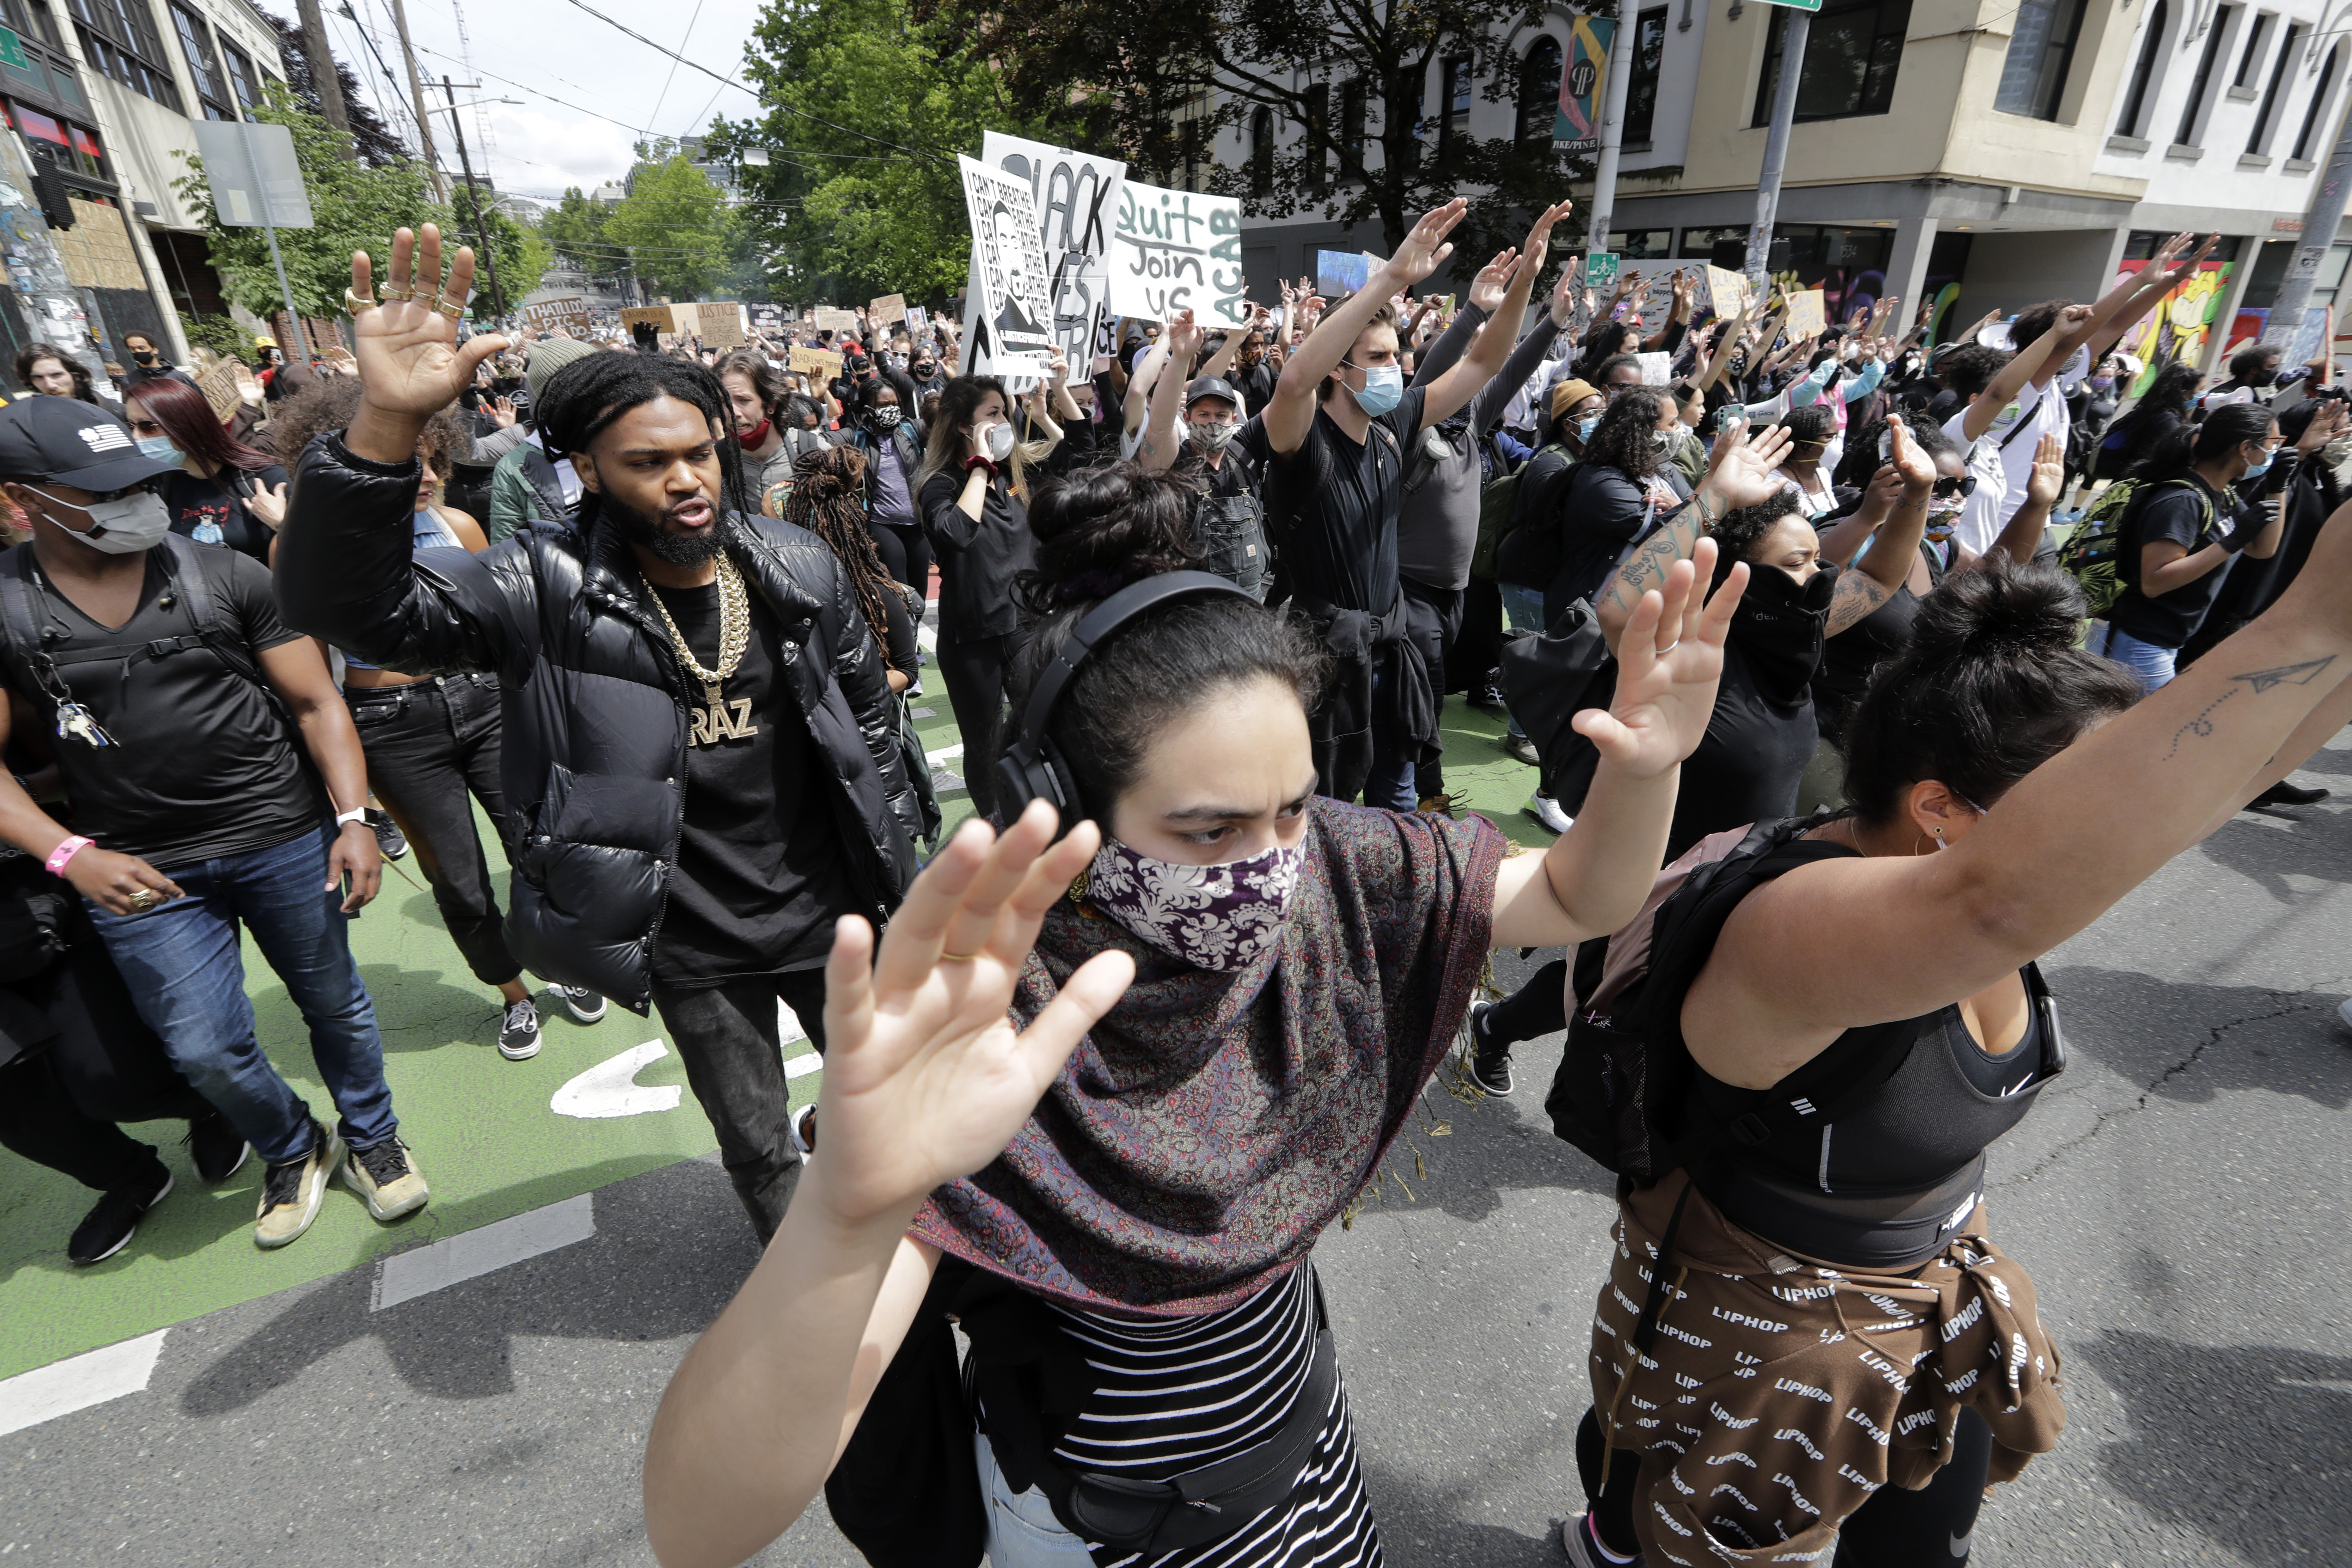 San Francisco Under Curfew Following Protests, Overnight Violence